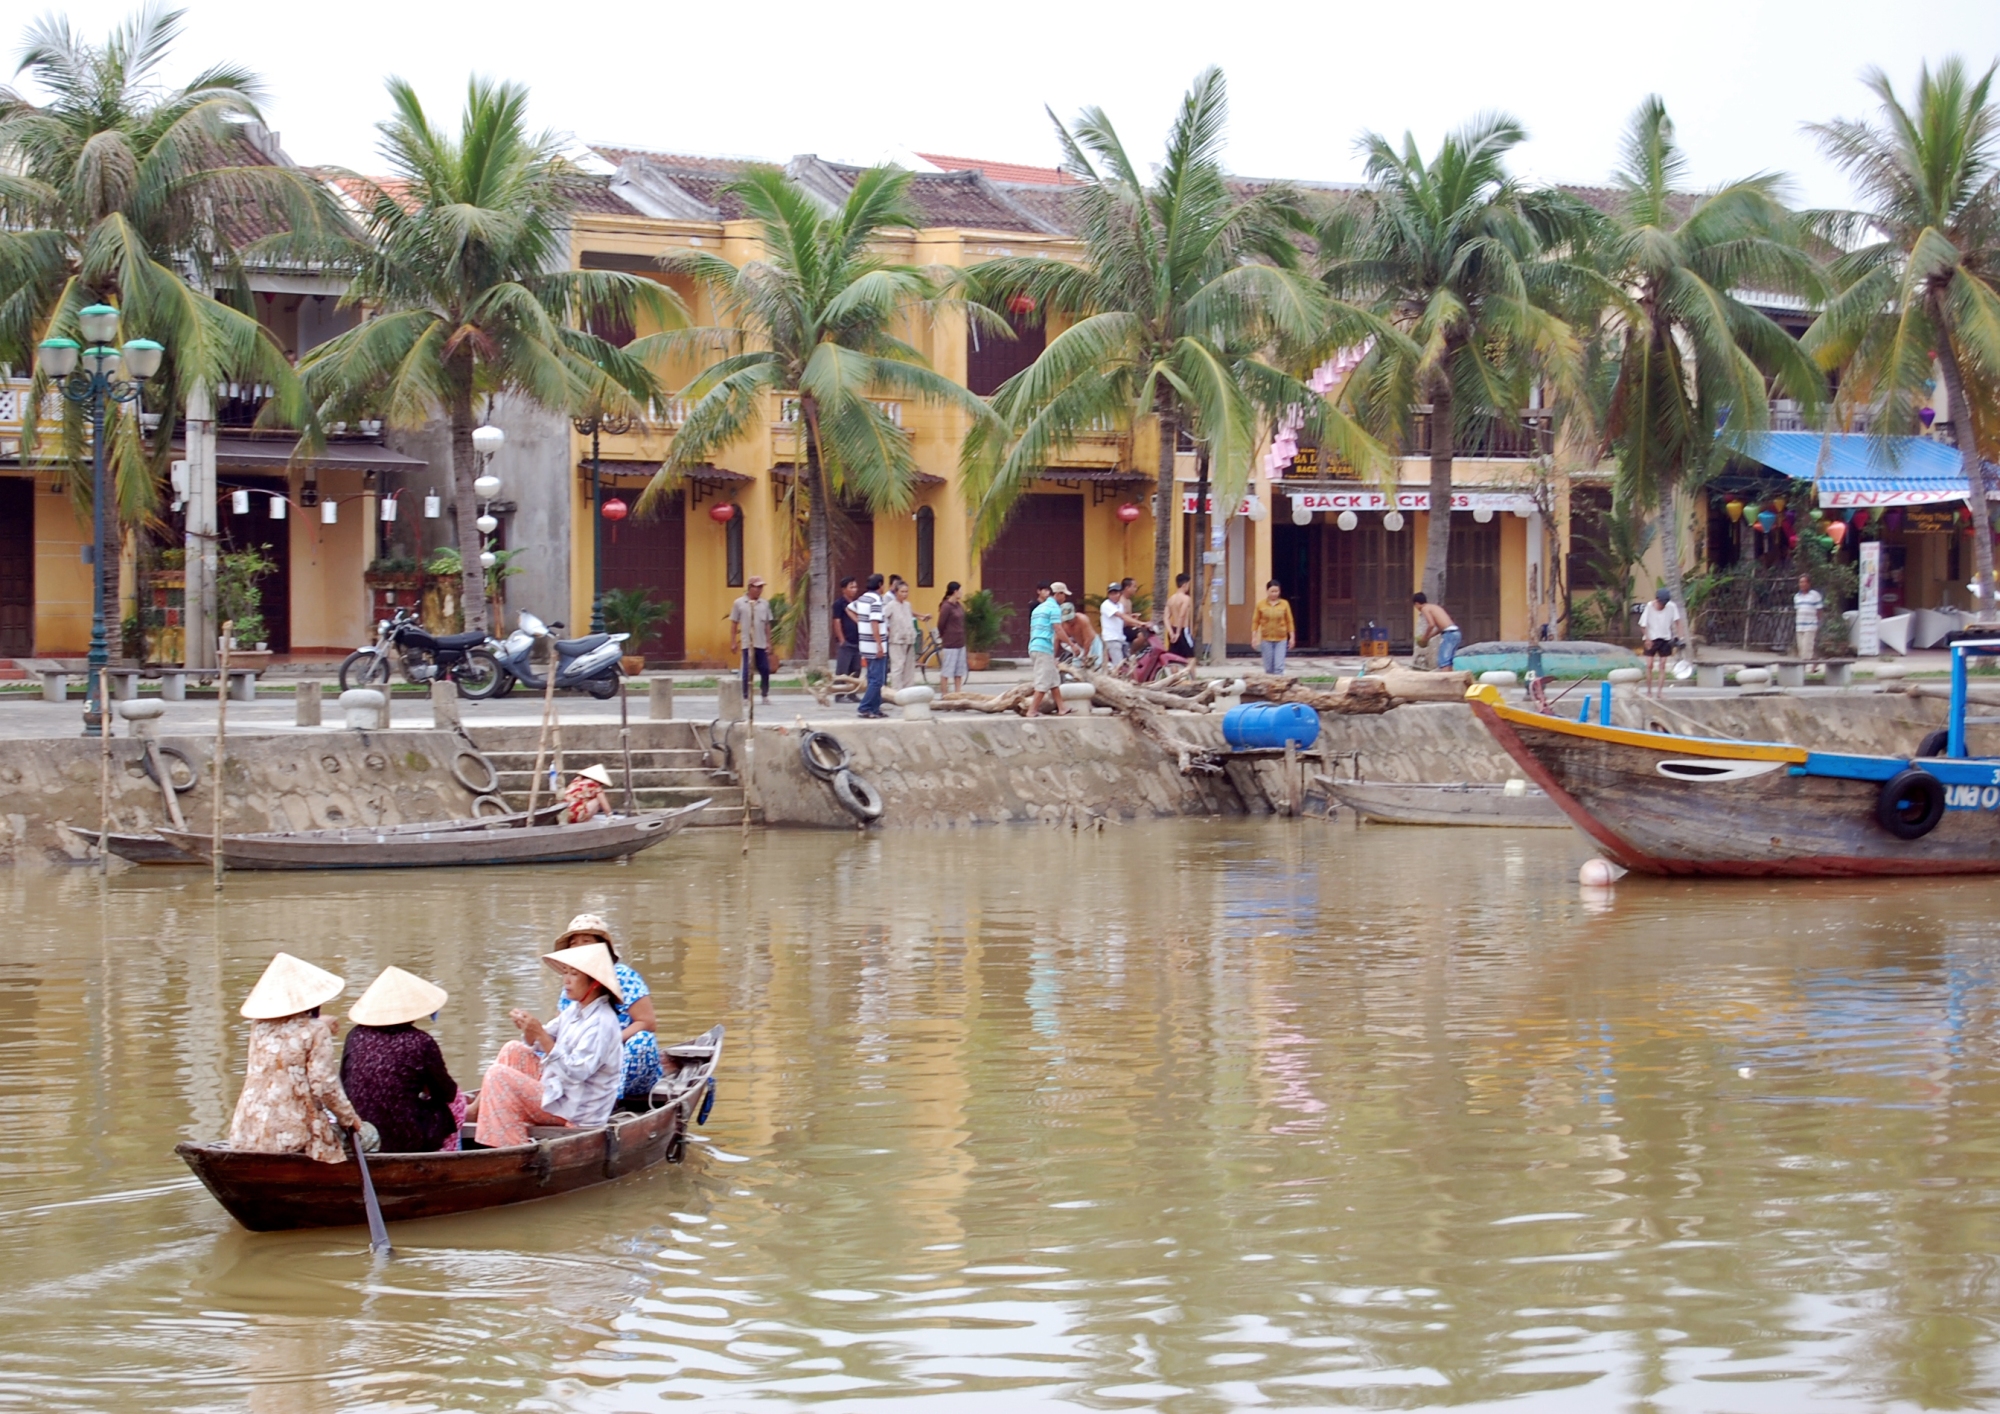 Hoi An is a picturesque town I visited on a motorcycle tour in Vietnam.